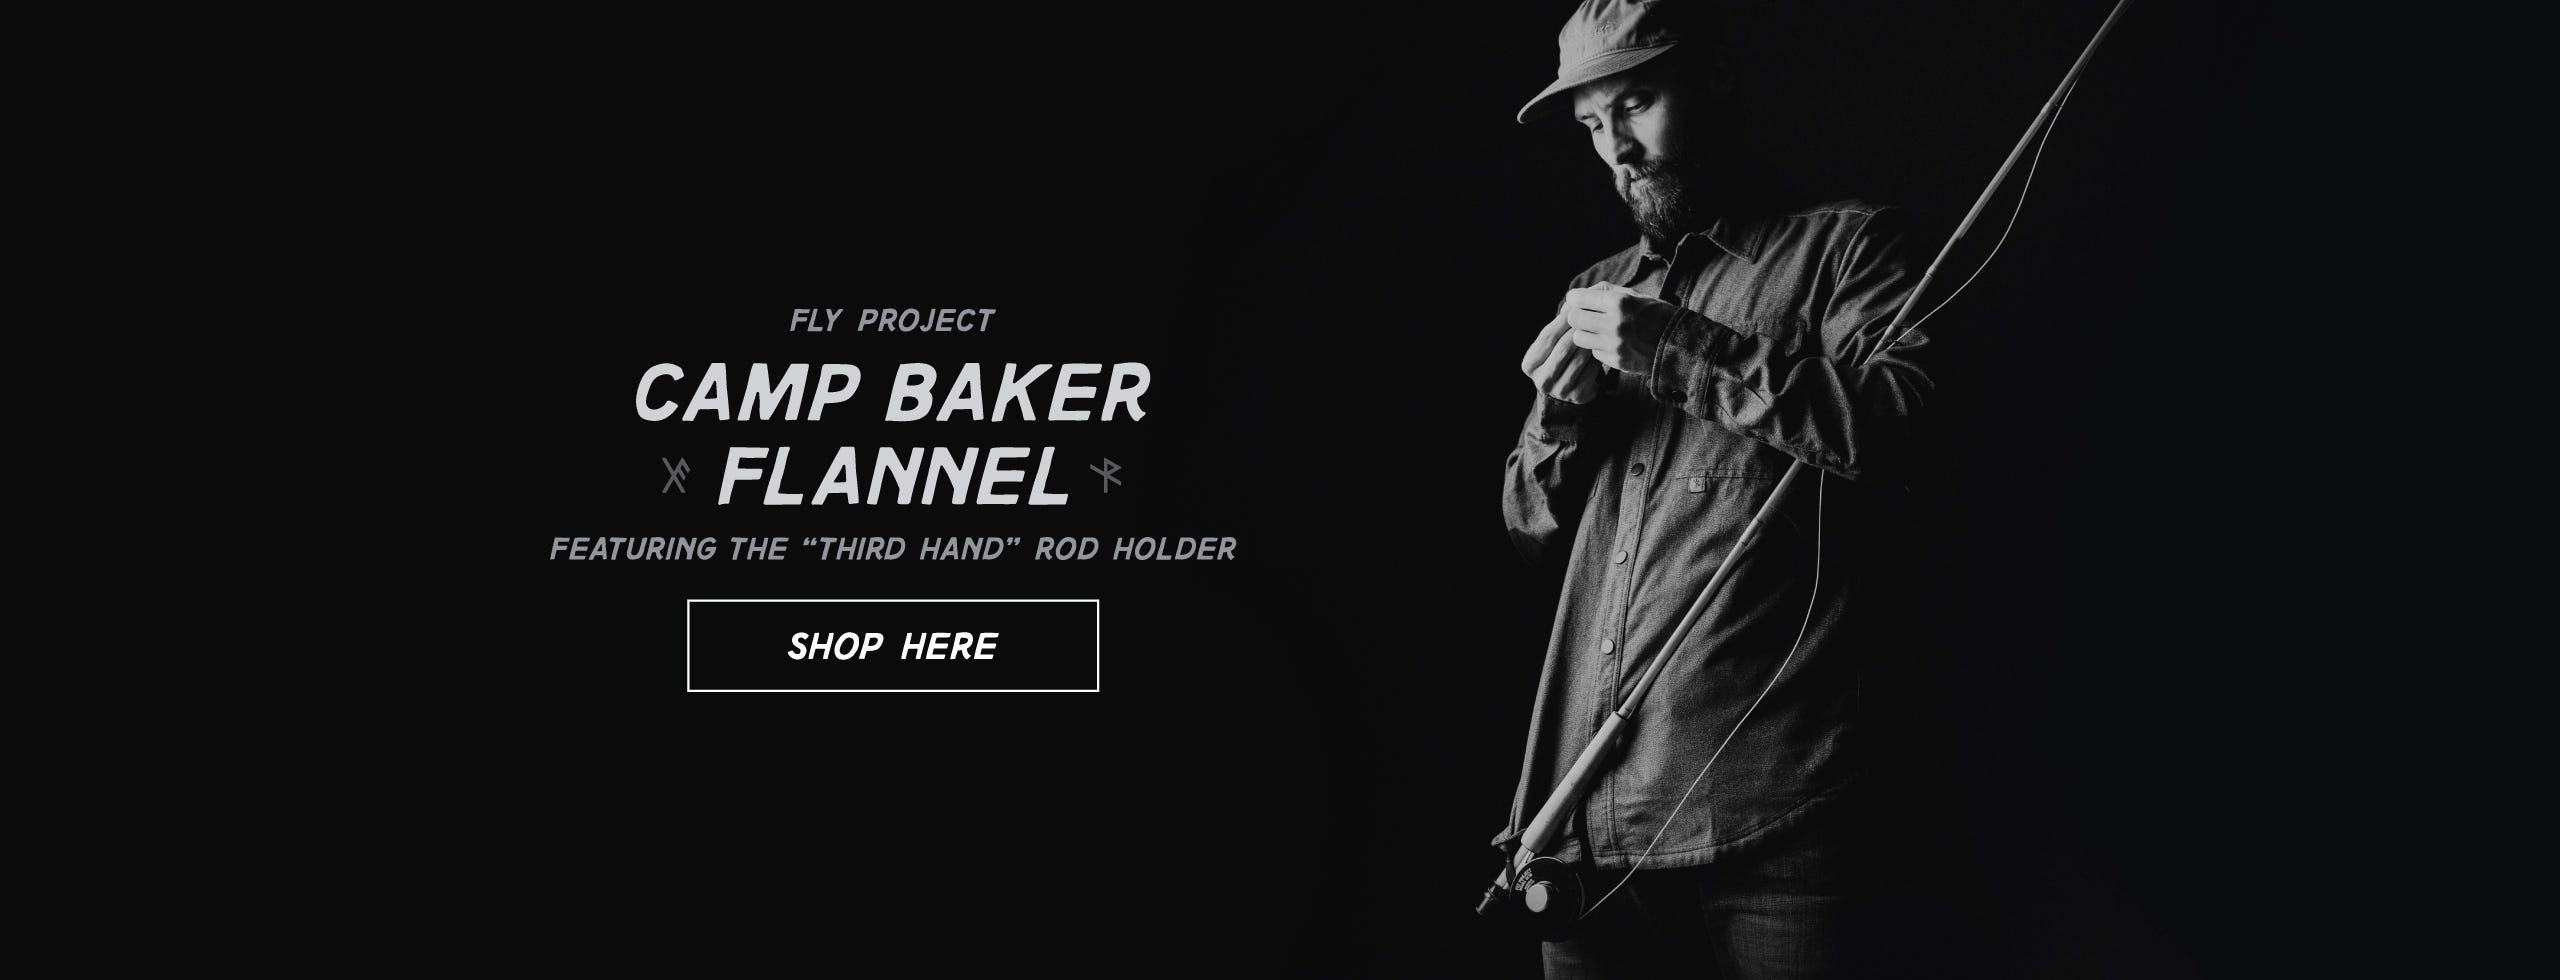 Introducing the Fly Project Camp Baker Flannel, featuring the "third hand" rod holder